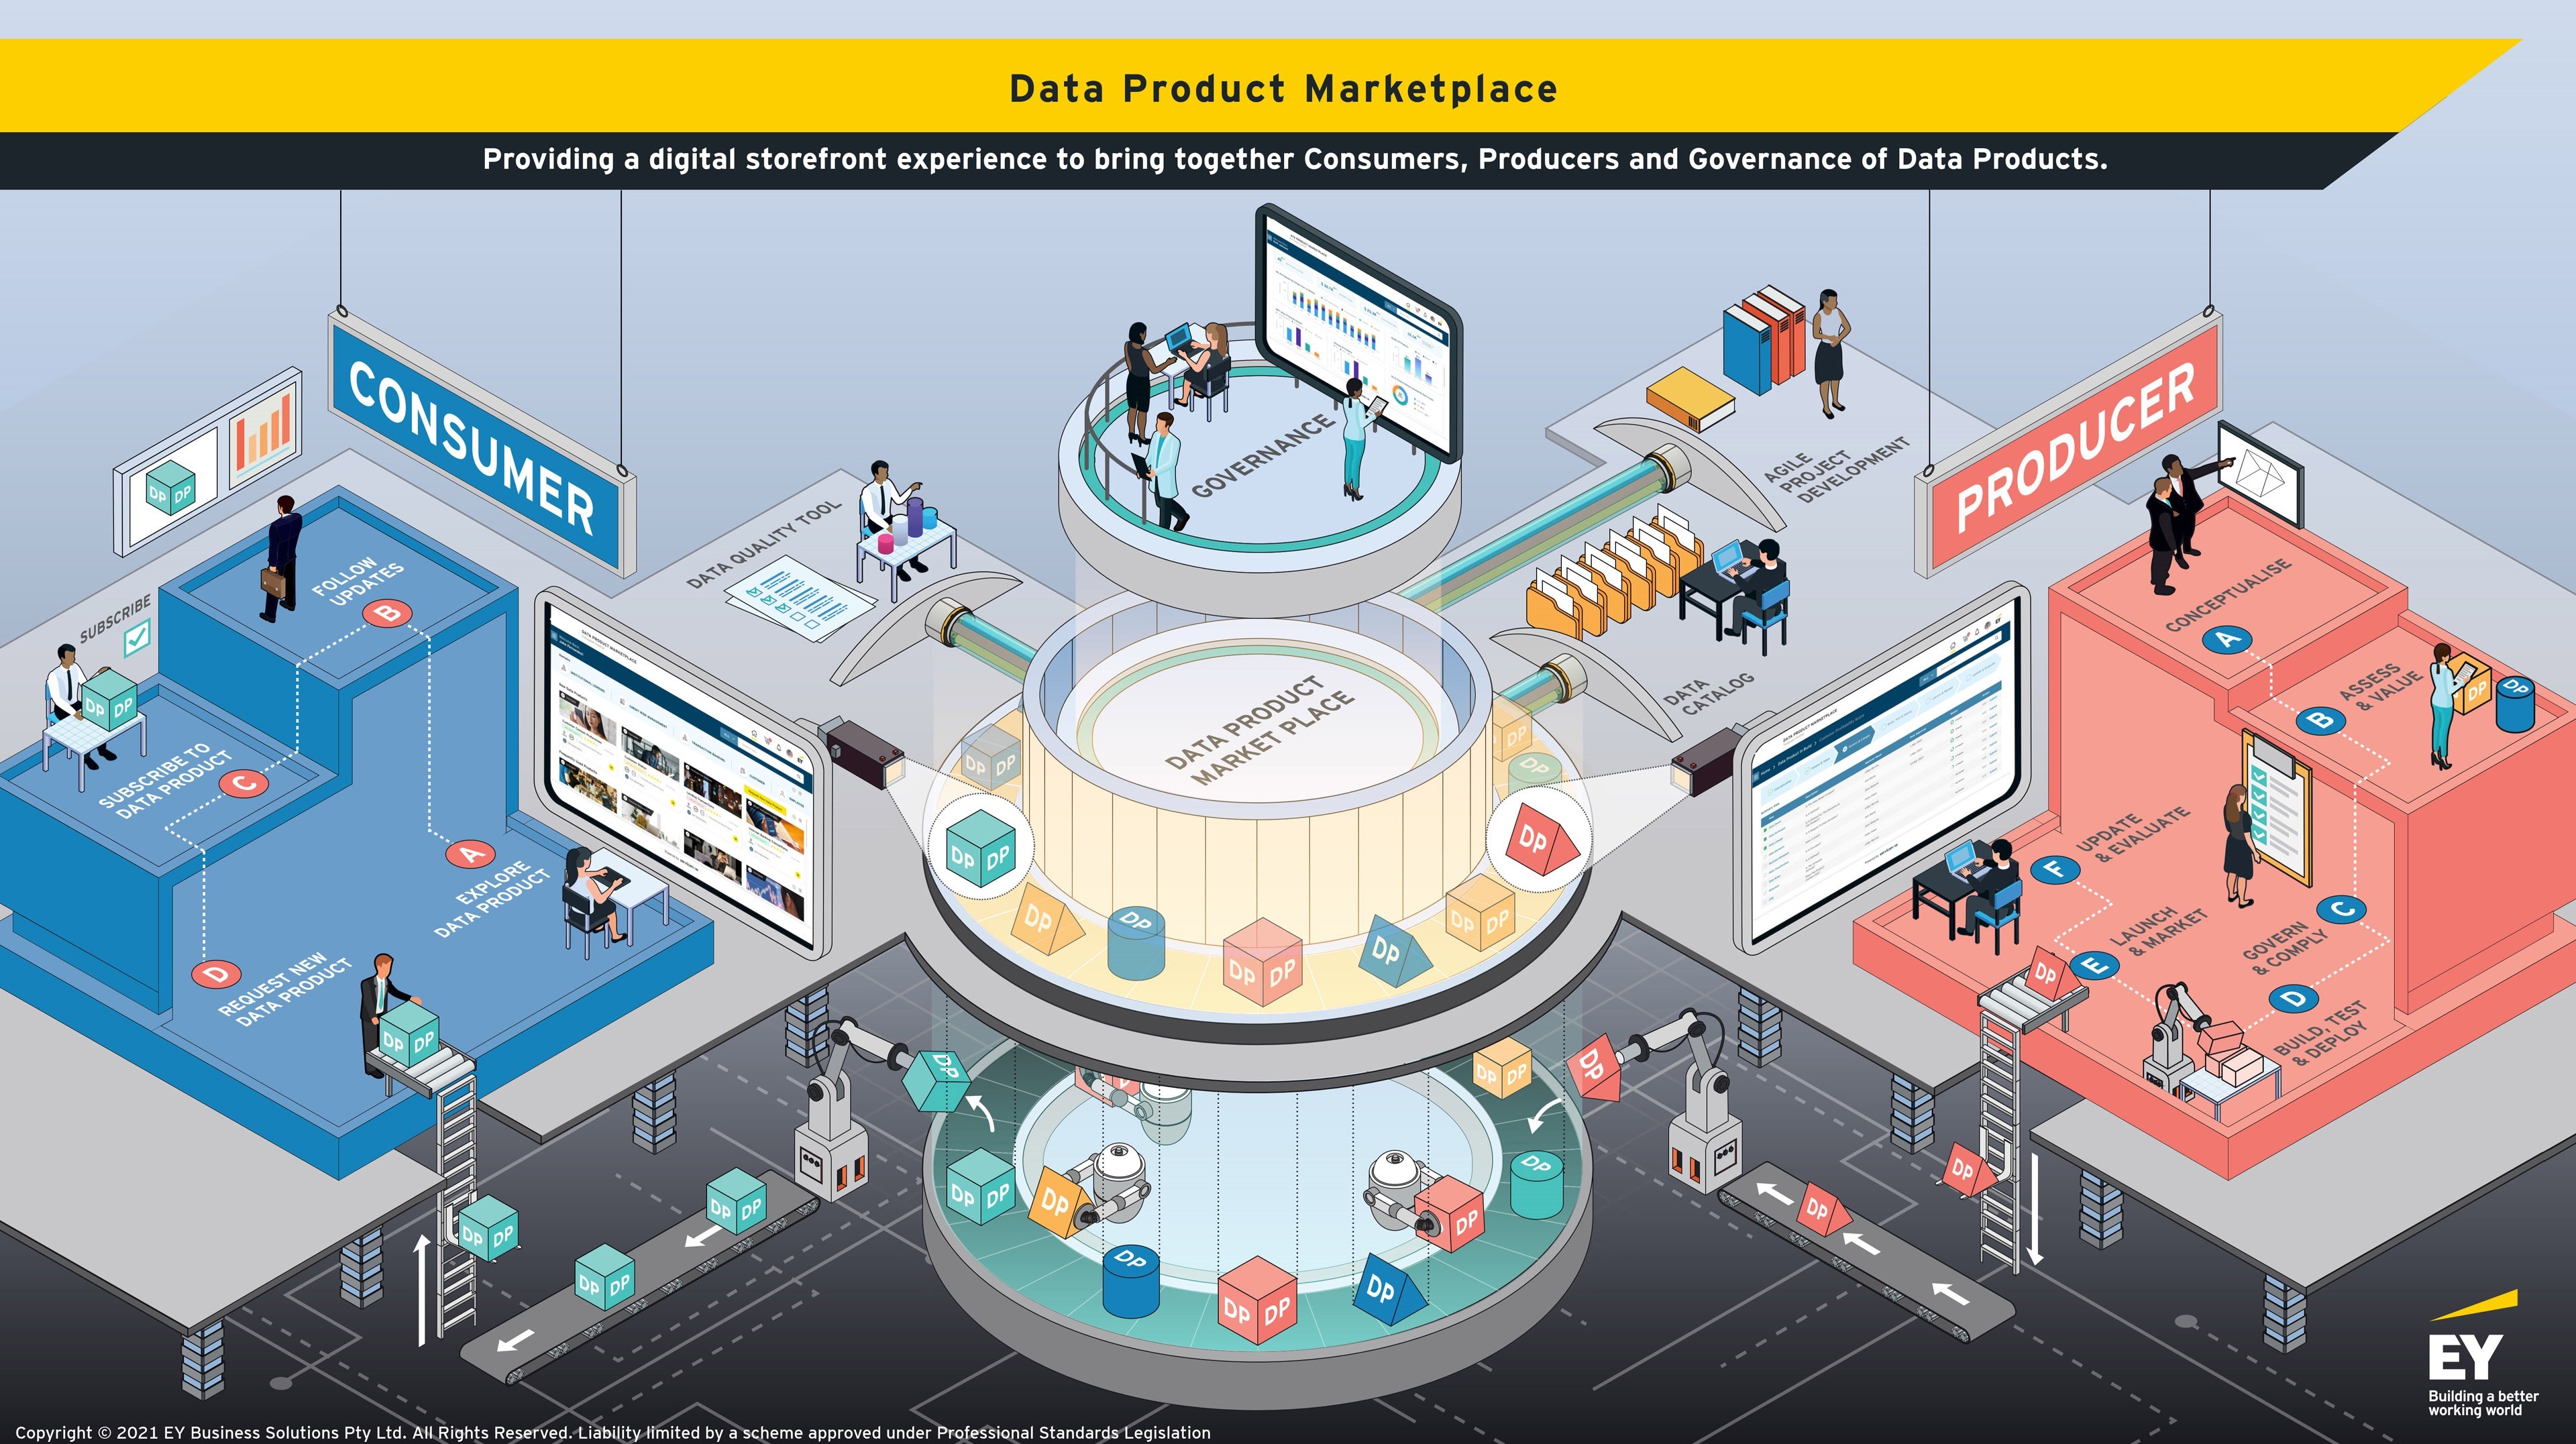 A data product market place   connects data producers with data consumers by delivering analytics in the form of easily consumable products.